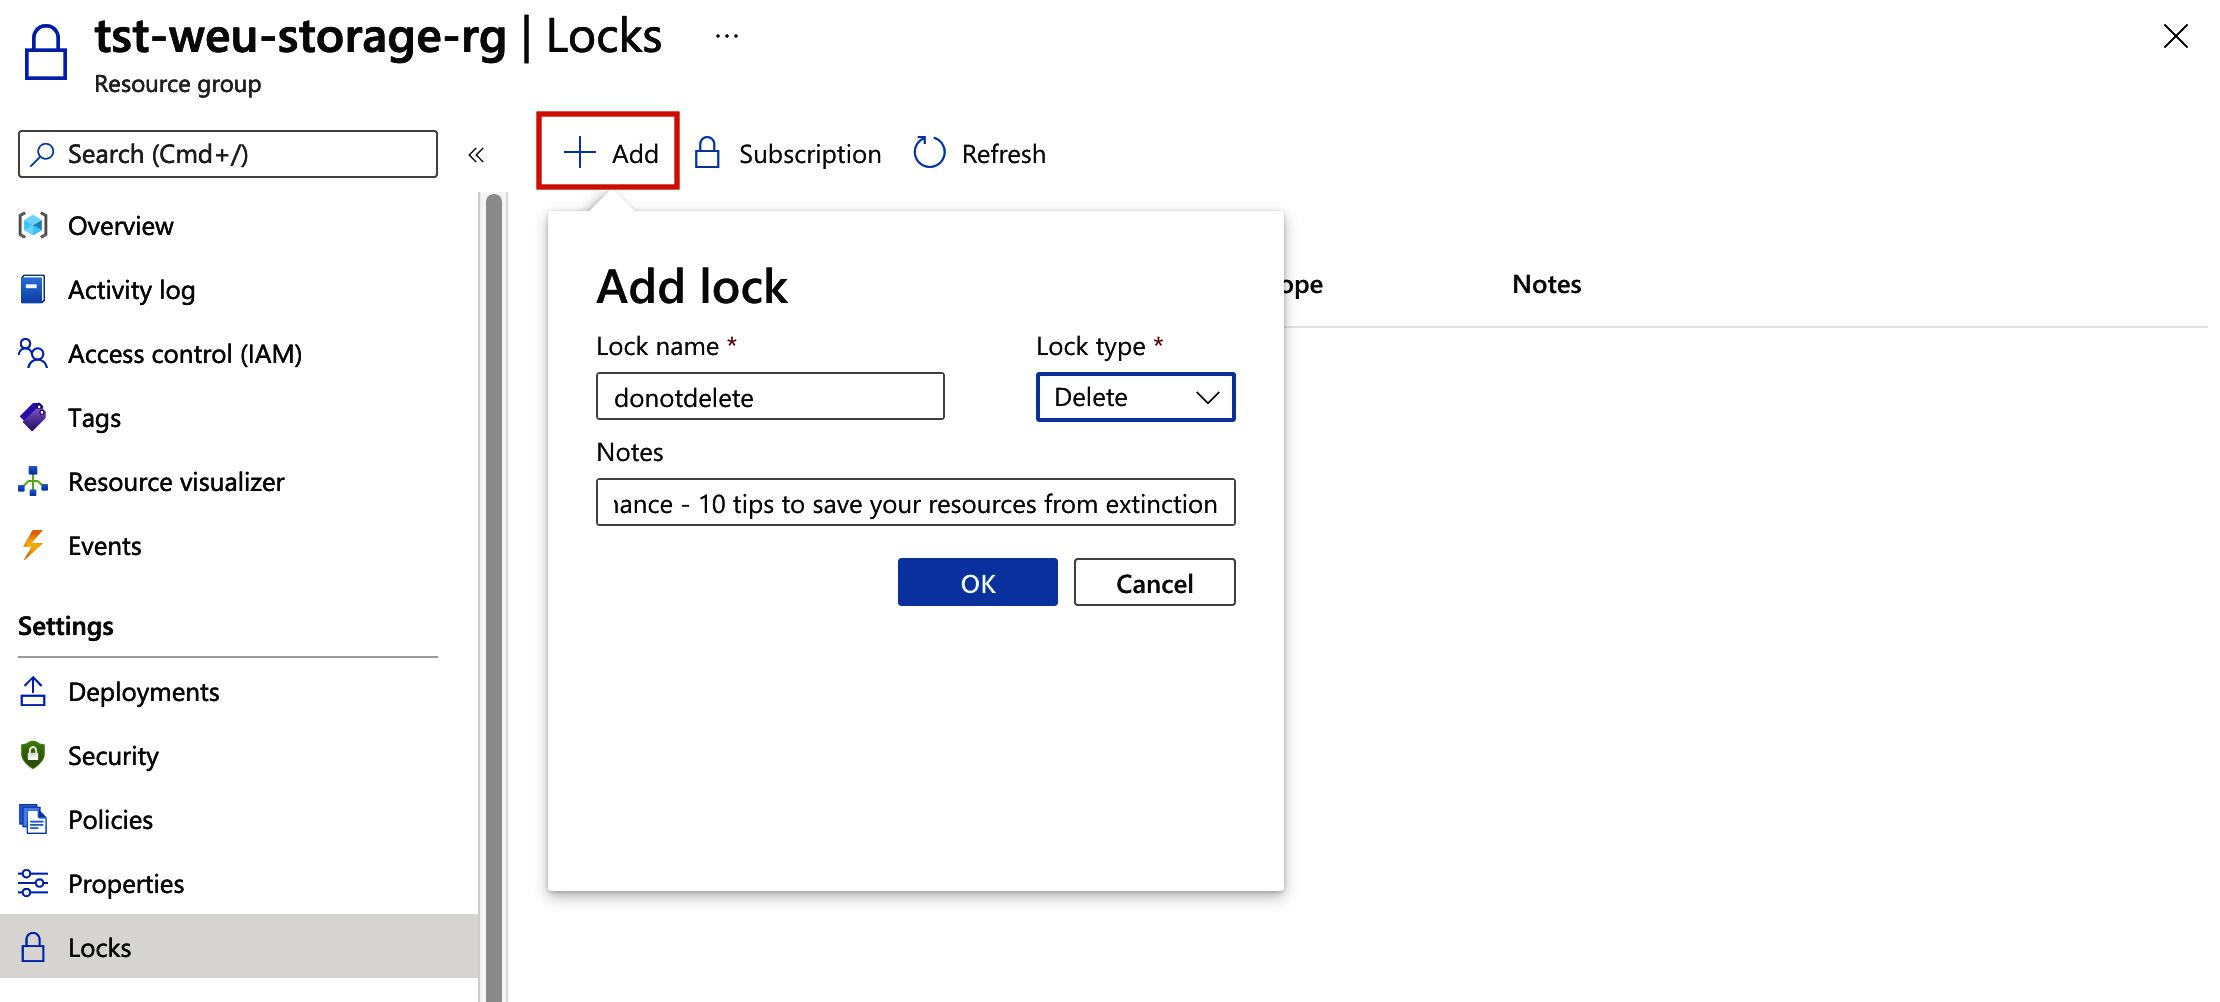 Image of the resource group locks settings view in the Azure Portal. The ‘Add’ button is highlighted, when clicked it opens a dialogue box. In the Add dialogue box you can enter a lock name, enter a note and select a lock type (available types are delete and read-only) 